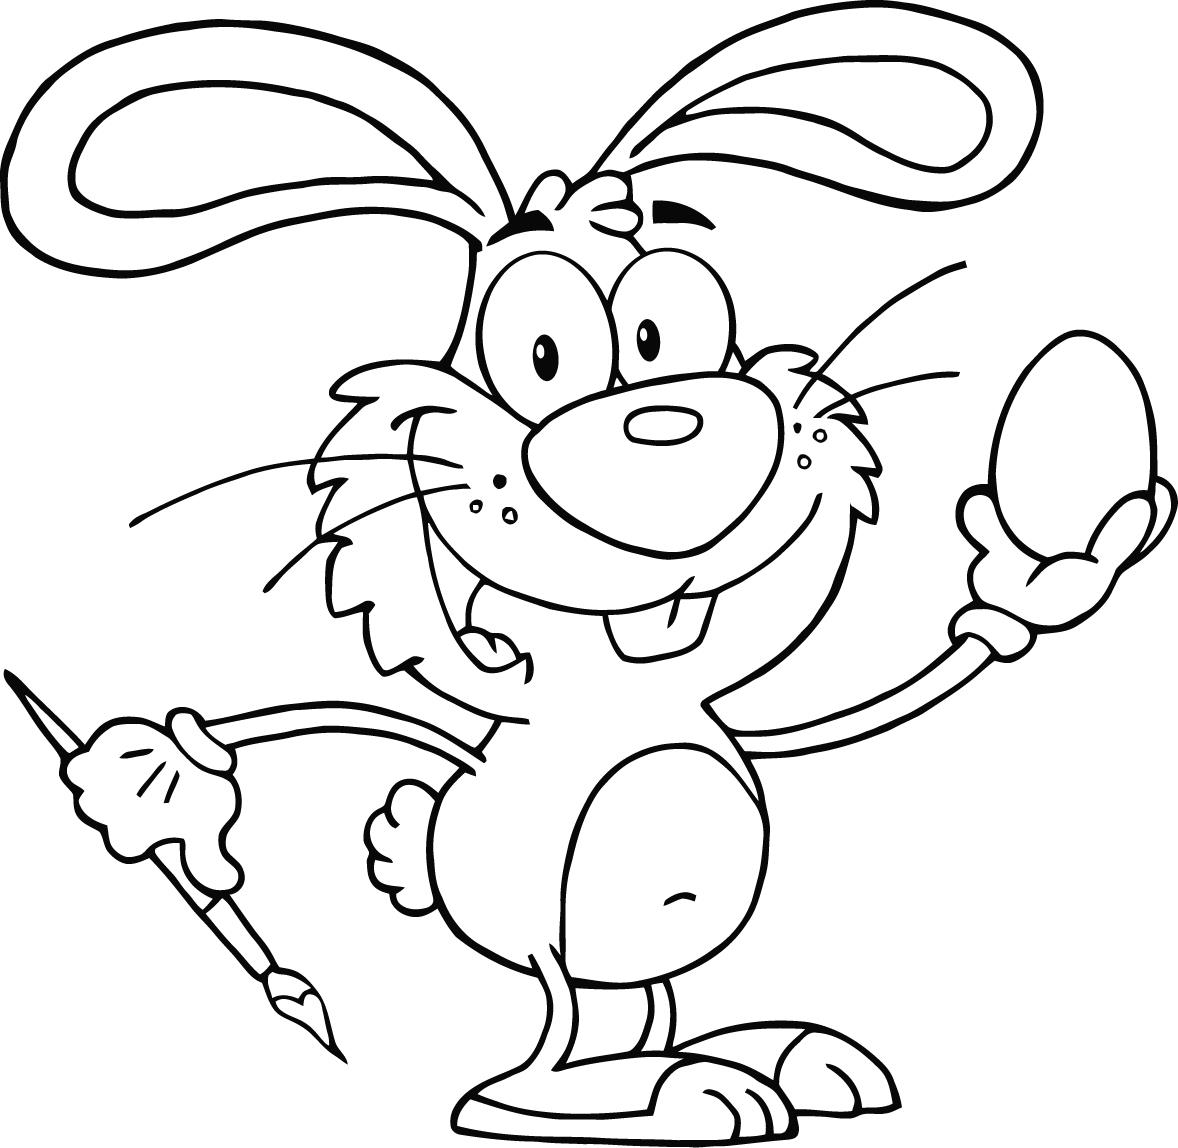 Coloring Pictures Of Bunnies 5